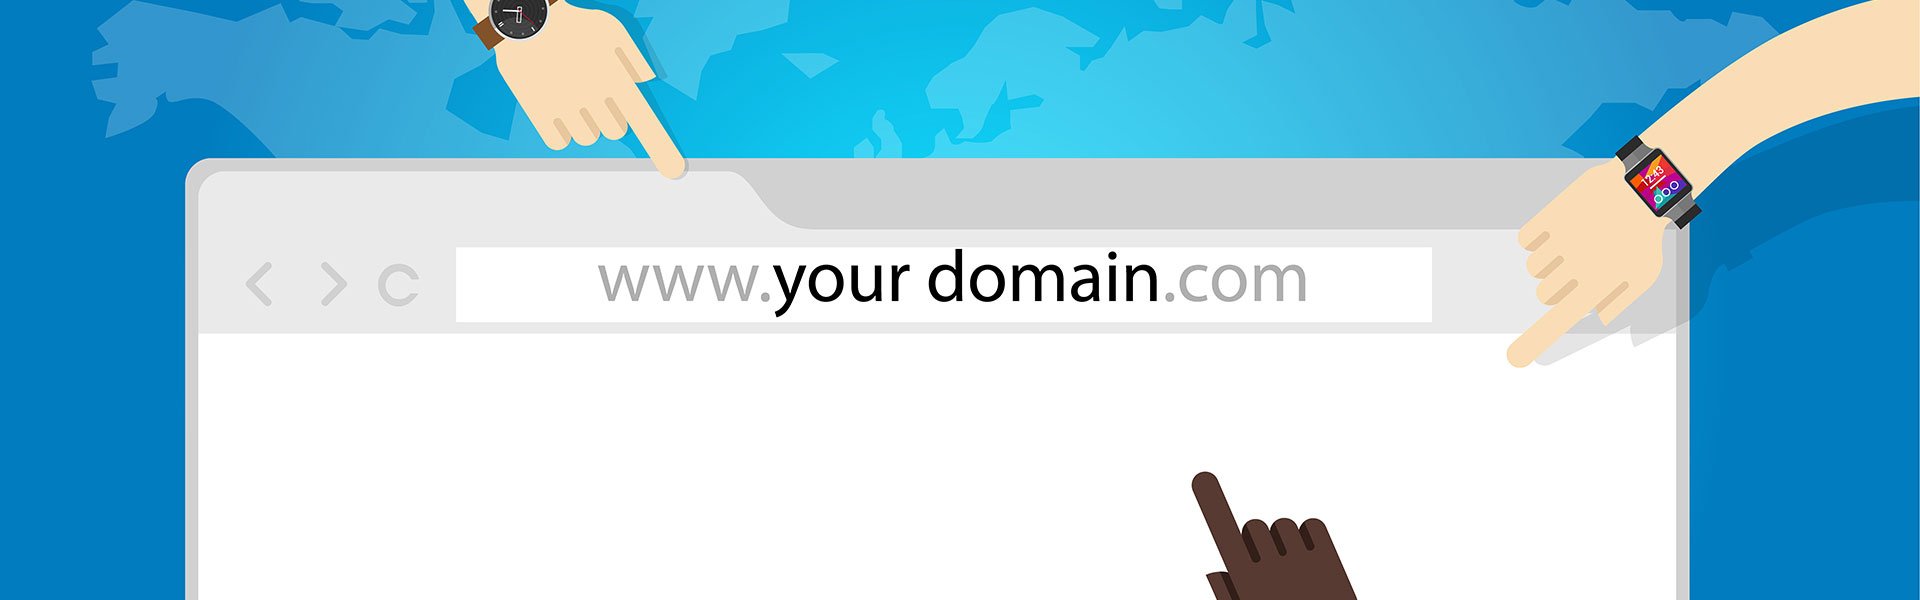 How Does a Domain Name Work?